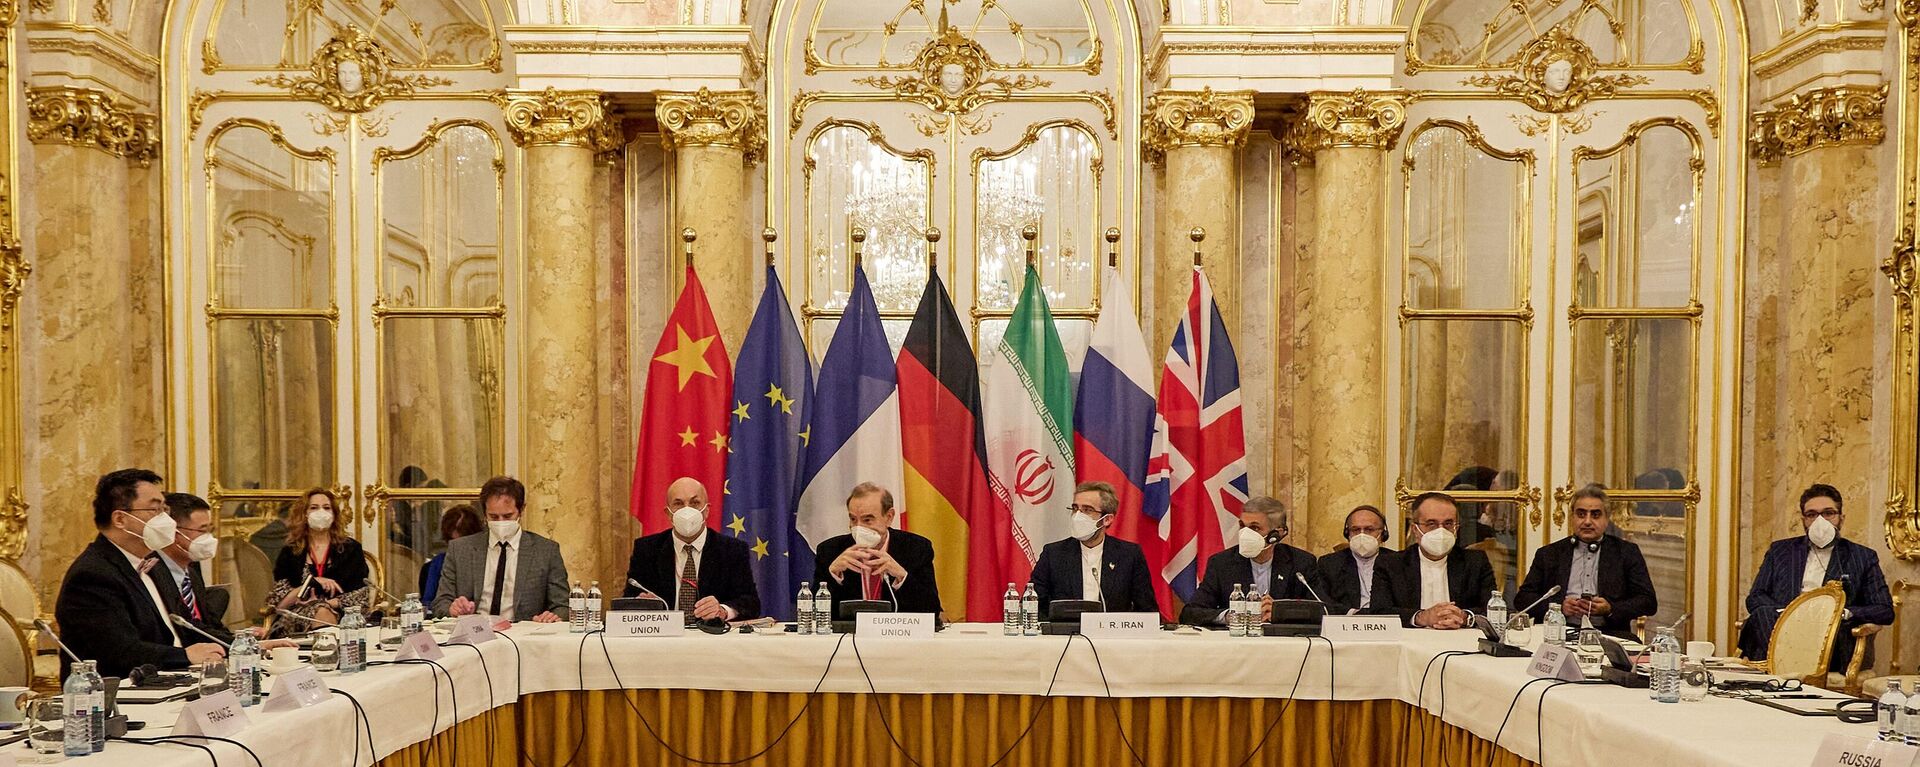 This handout photo taken and released on December 9, 2021 by the EU delegation in Vienna - EEAS shows representatives attending a meeting of the joint commission on negotiations aimed at reviving the Iran nuclear deal in Vienna, Austria. - Negotiators of the Iranian nuclear deal met on December 9, 2021, 'determined to work hard' to save the 2015 deal after the suspension of talks last week. (Photo by Handout / EU DELEGATION IN VIENNA / AFP)  - Sputnik International, 1920, 12.09.2022